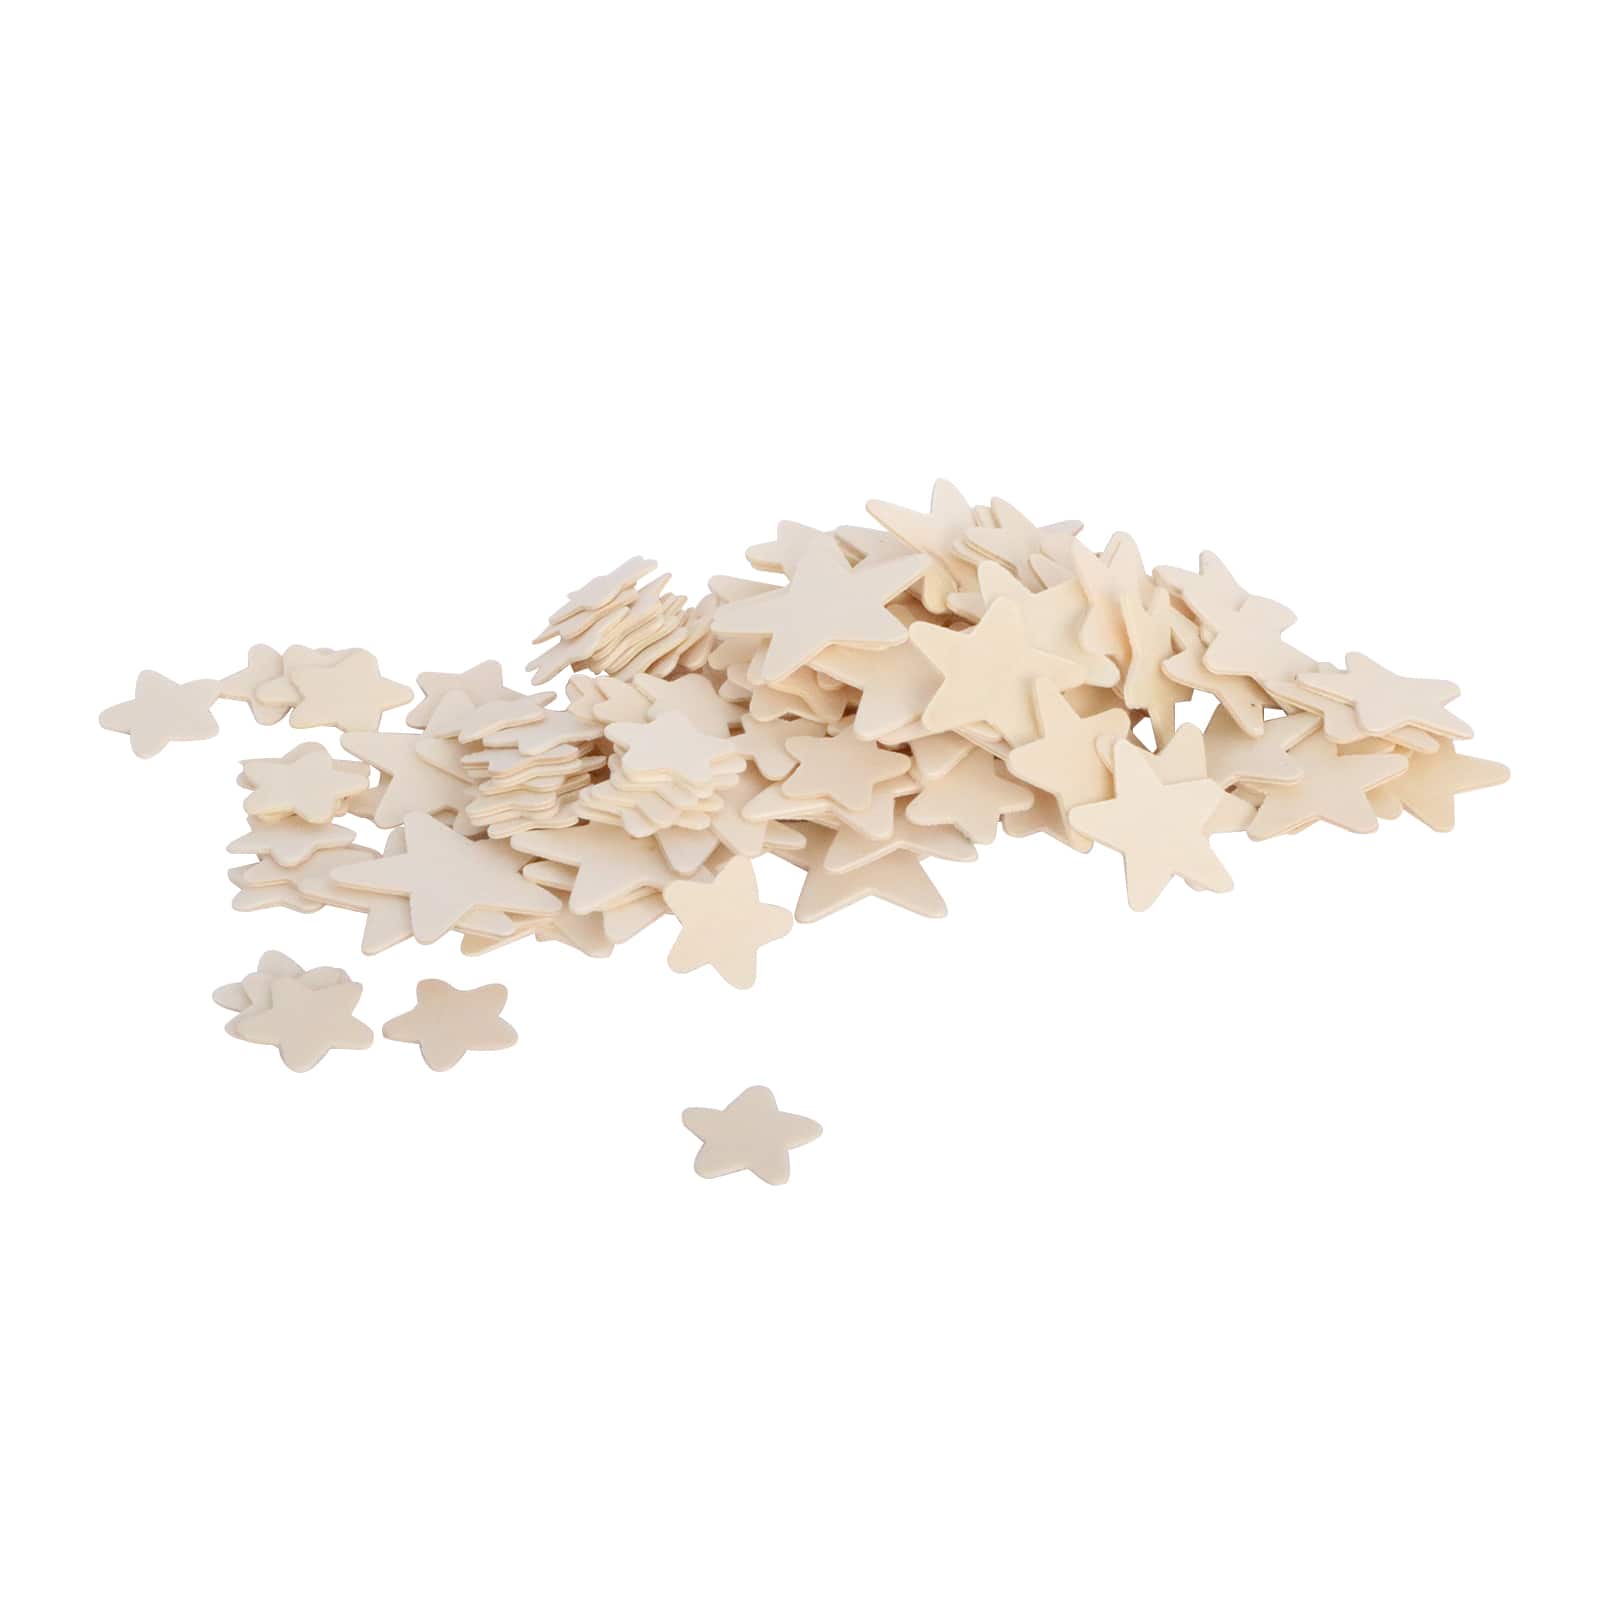 12 Packs: 130 ct. (1,560 total) Wood Stars by Creatology&#x2122;